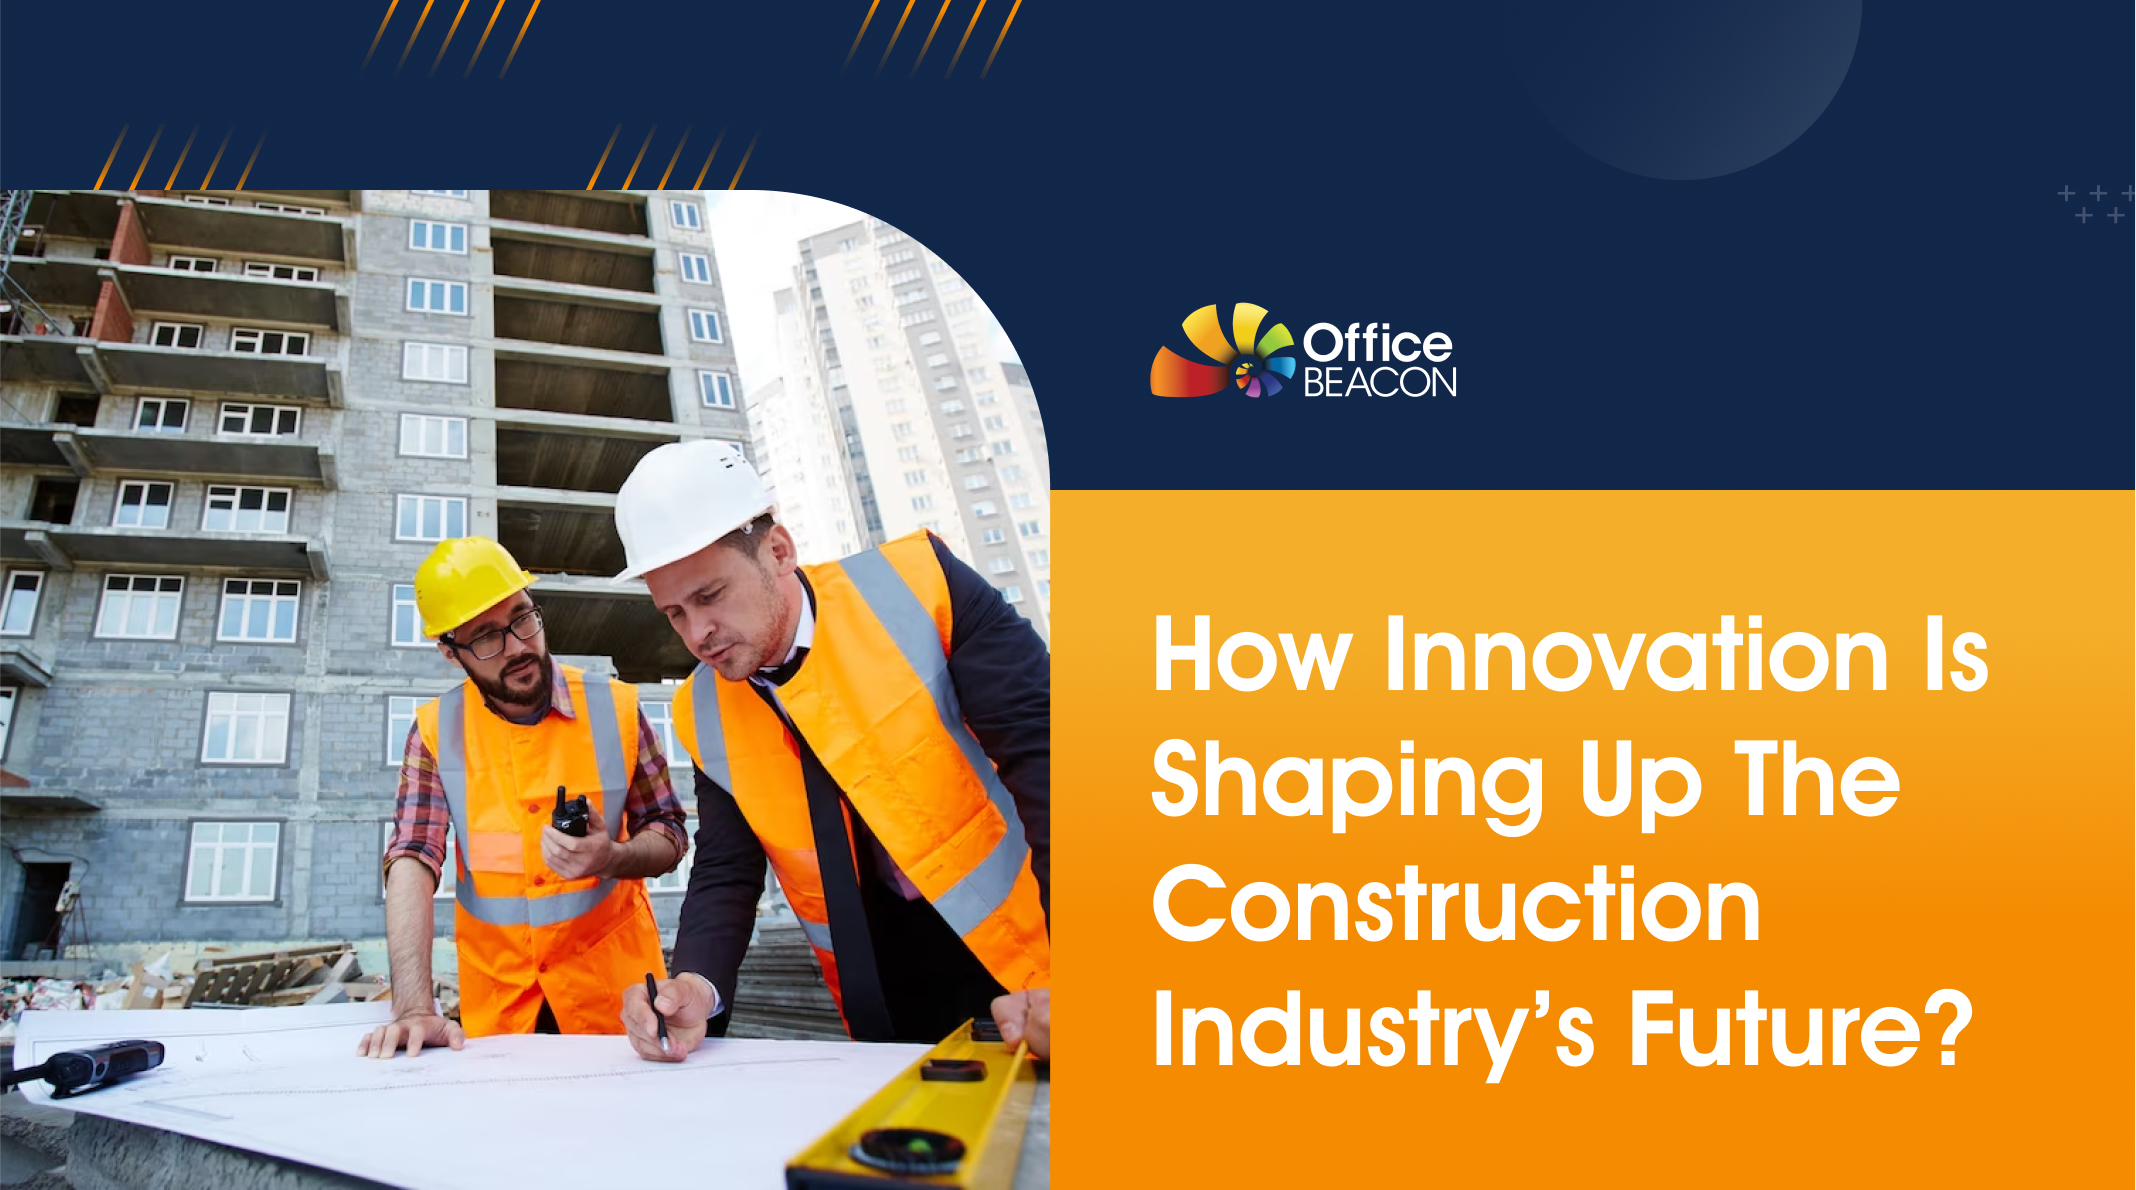 How Innovation Is Shaping Up The Construction Industry’s Future?